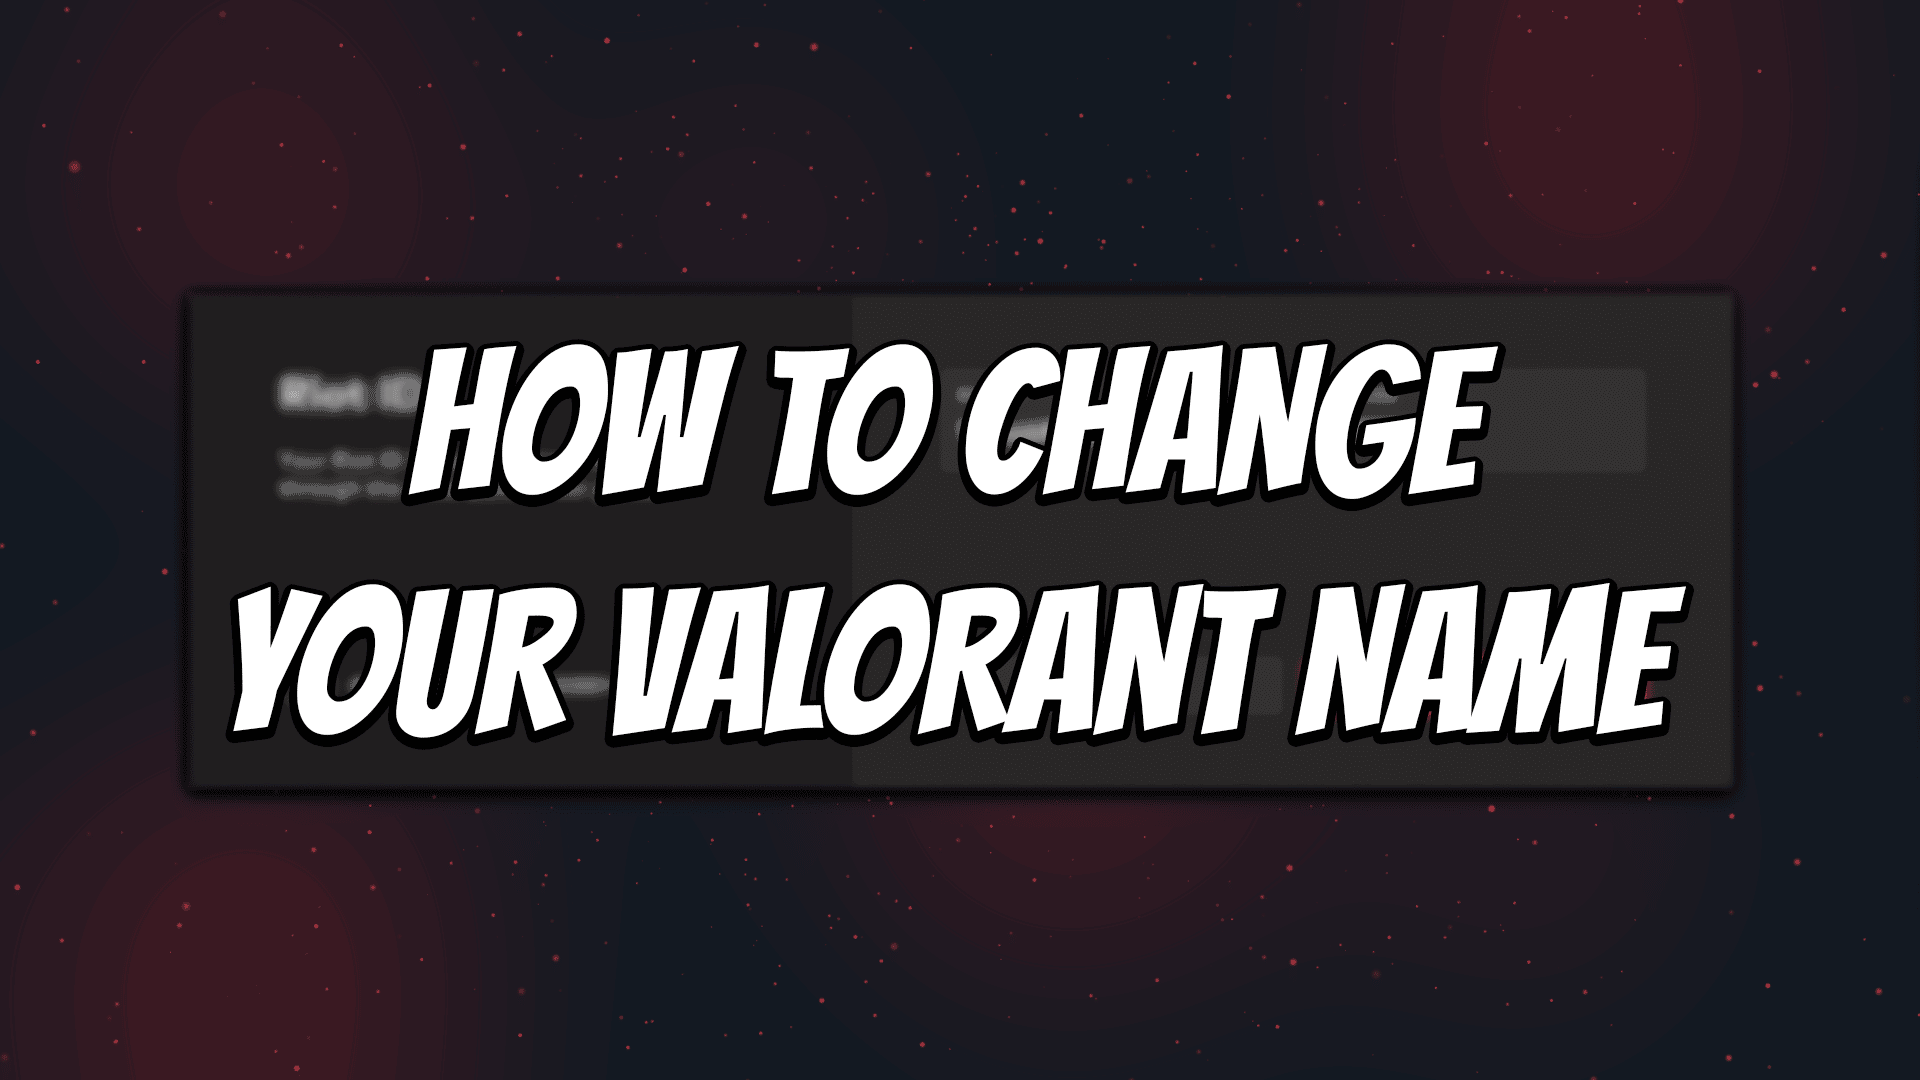 How To Change Your Valorant Name?